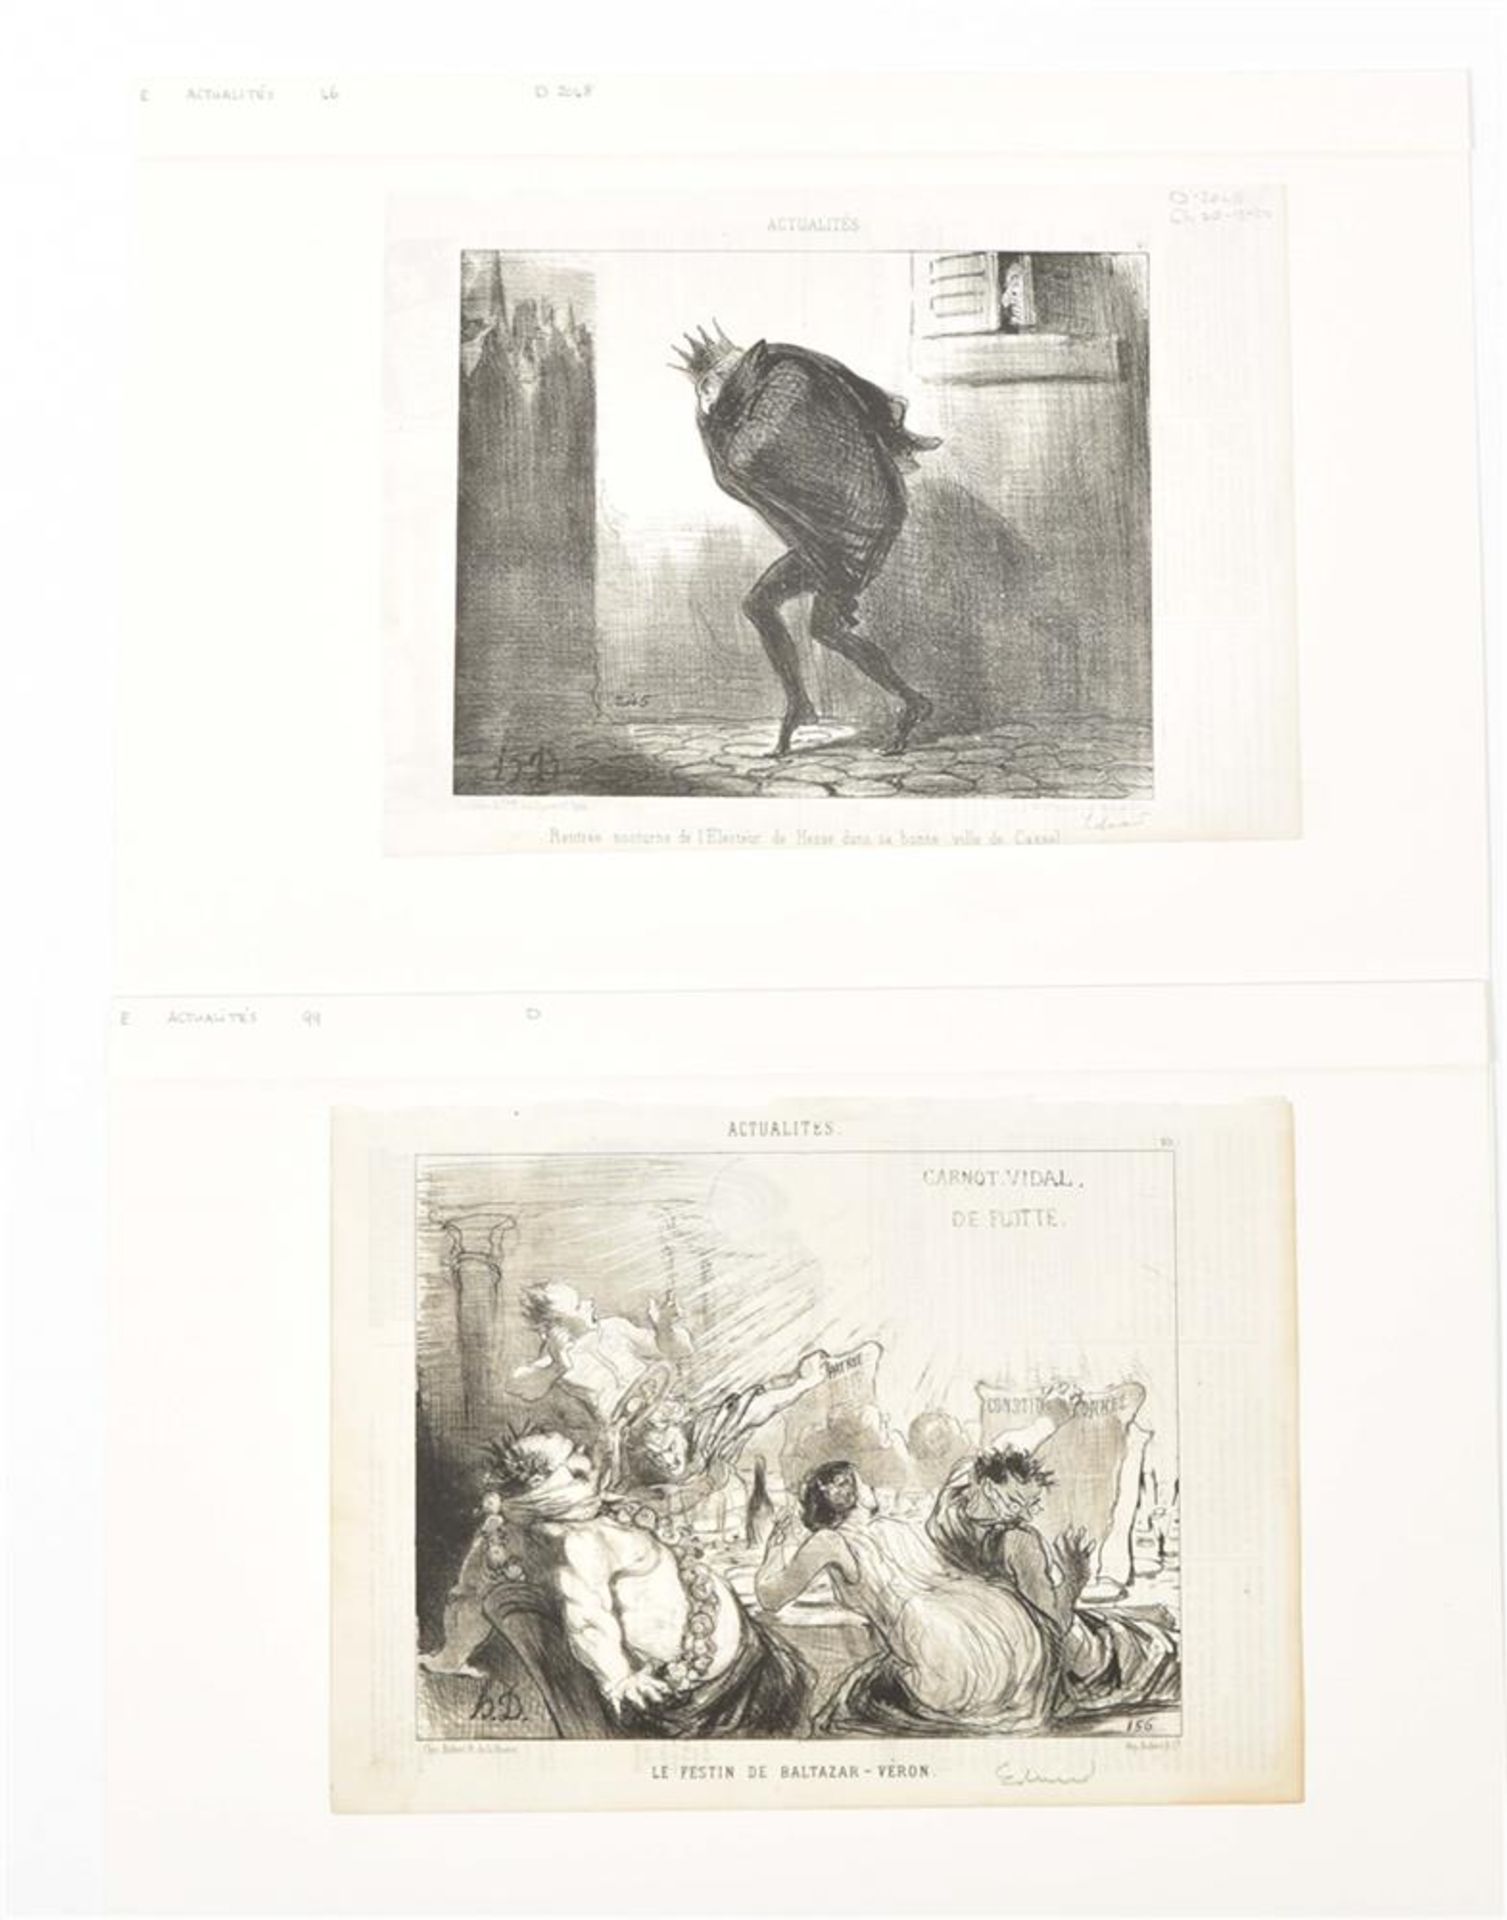 Daumier, H. (1808-79). Fourteen lithographs from Le Charivari's Actualités series - Image 3 of 9